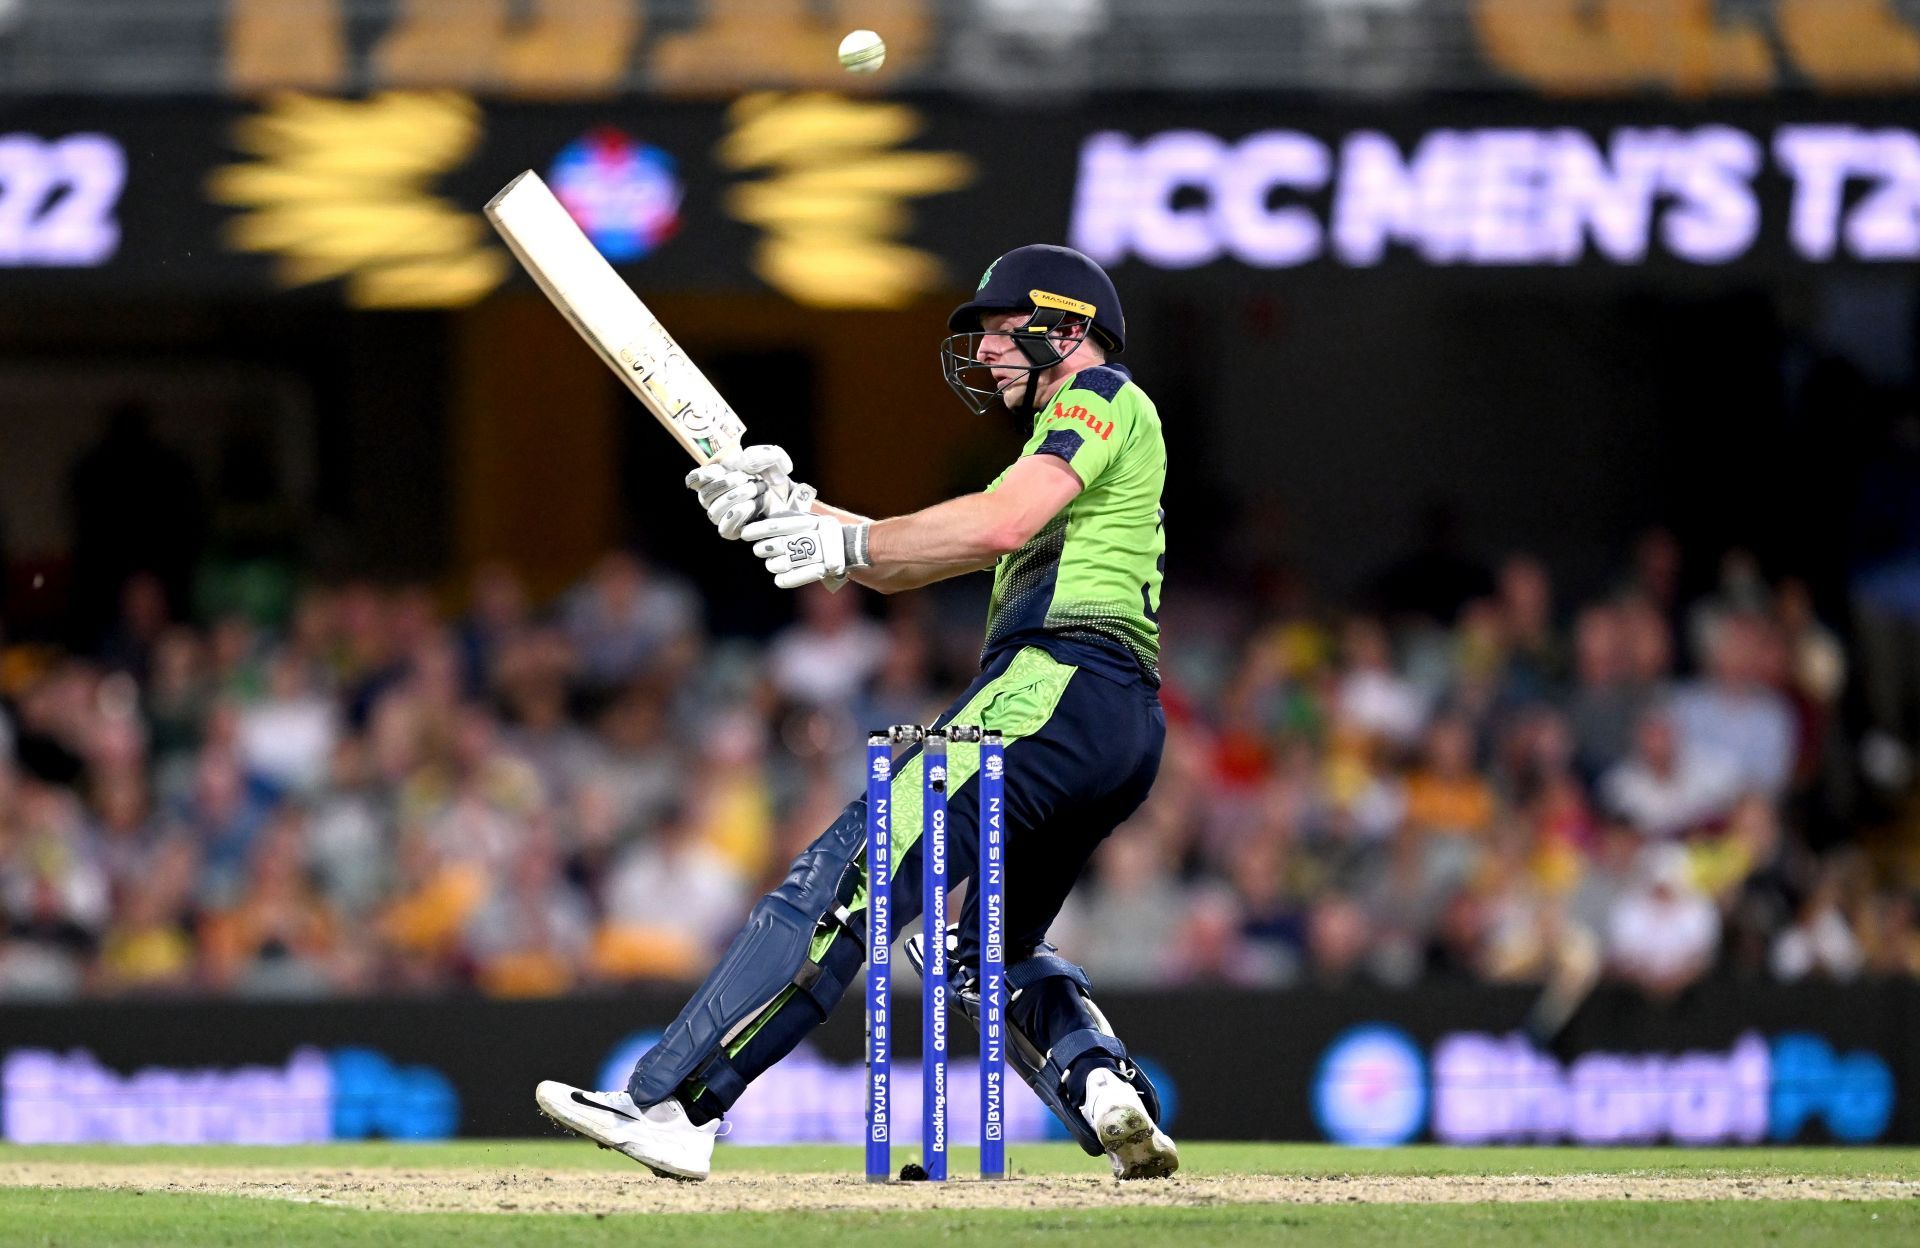 Lorcan Tucker scored 71* off 48 deliveries against Australia